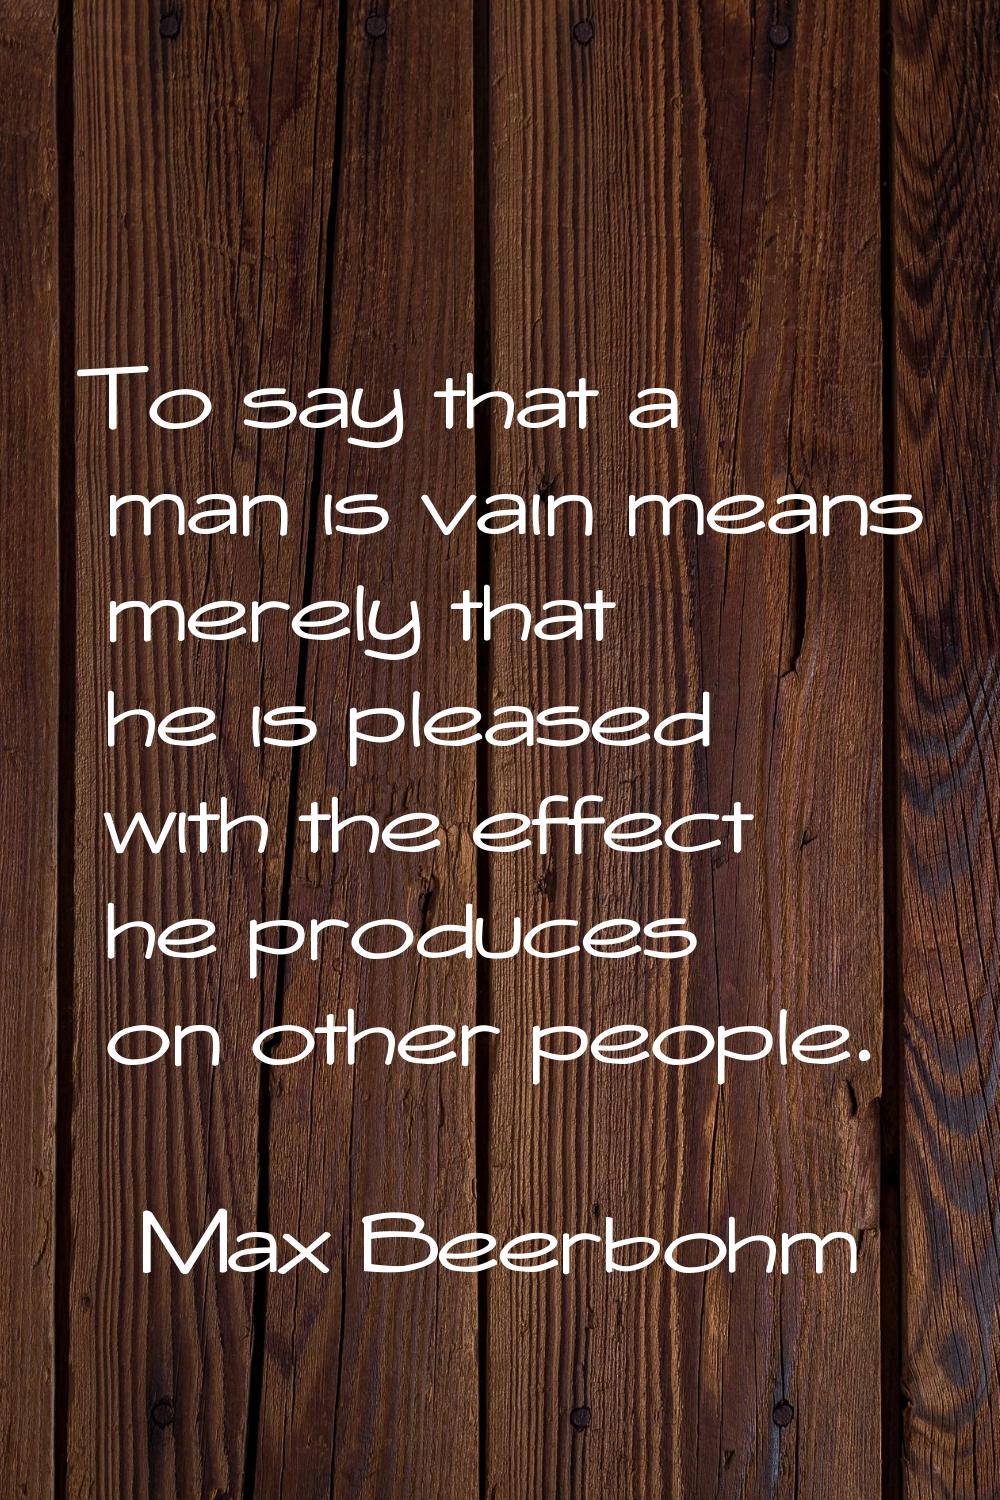 To say that a man is vain means merely that he is pleased with the effect he produces on other peop